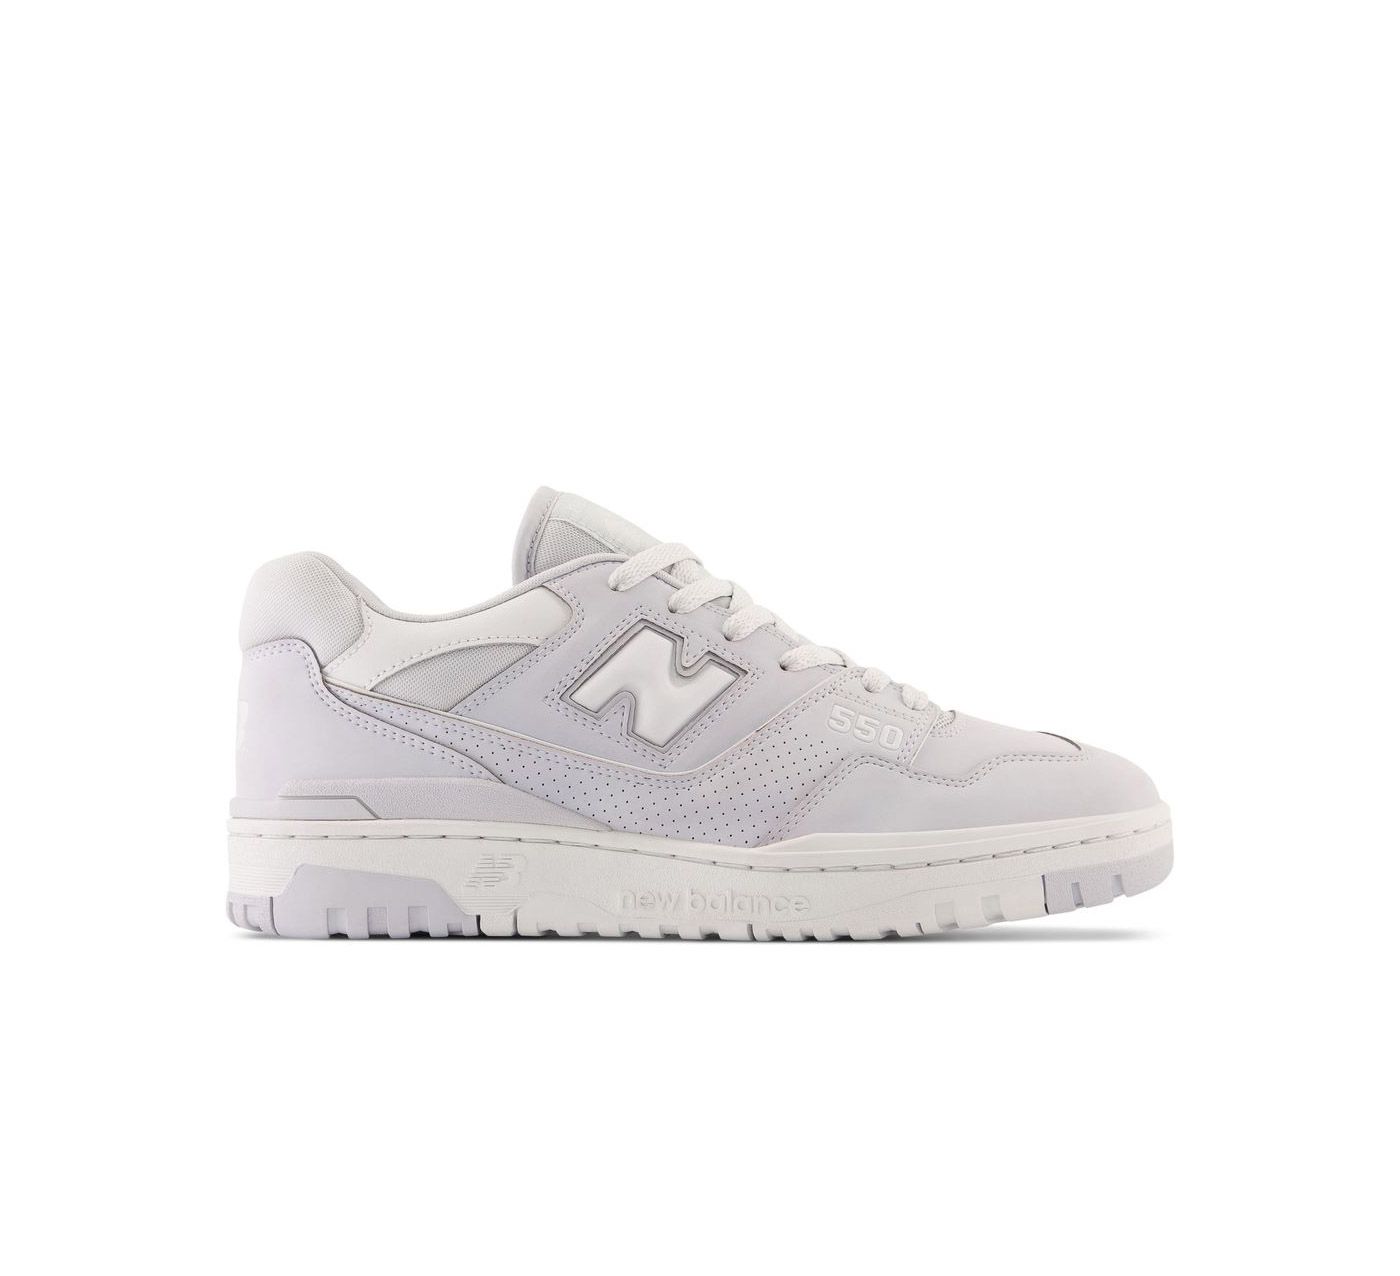 New Balance 550 trainers in grey